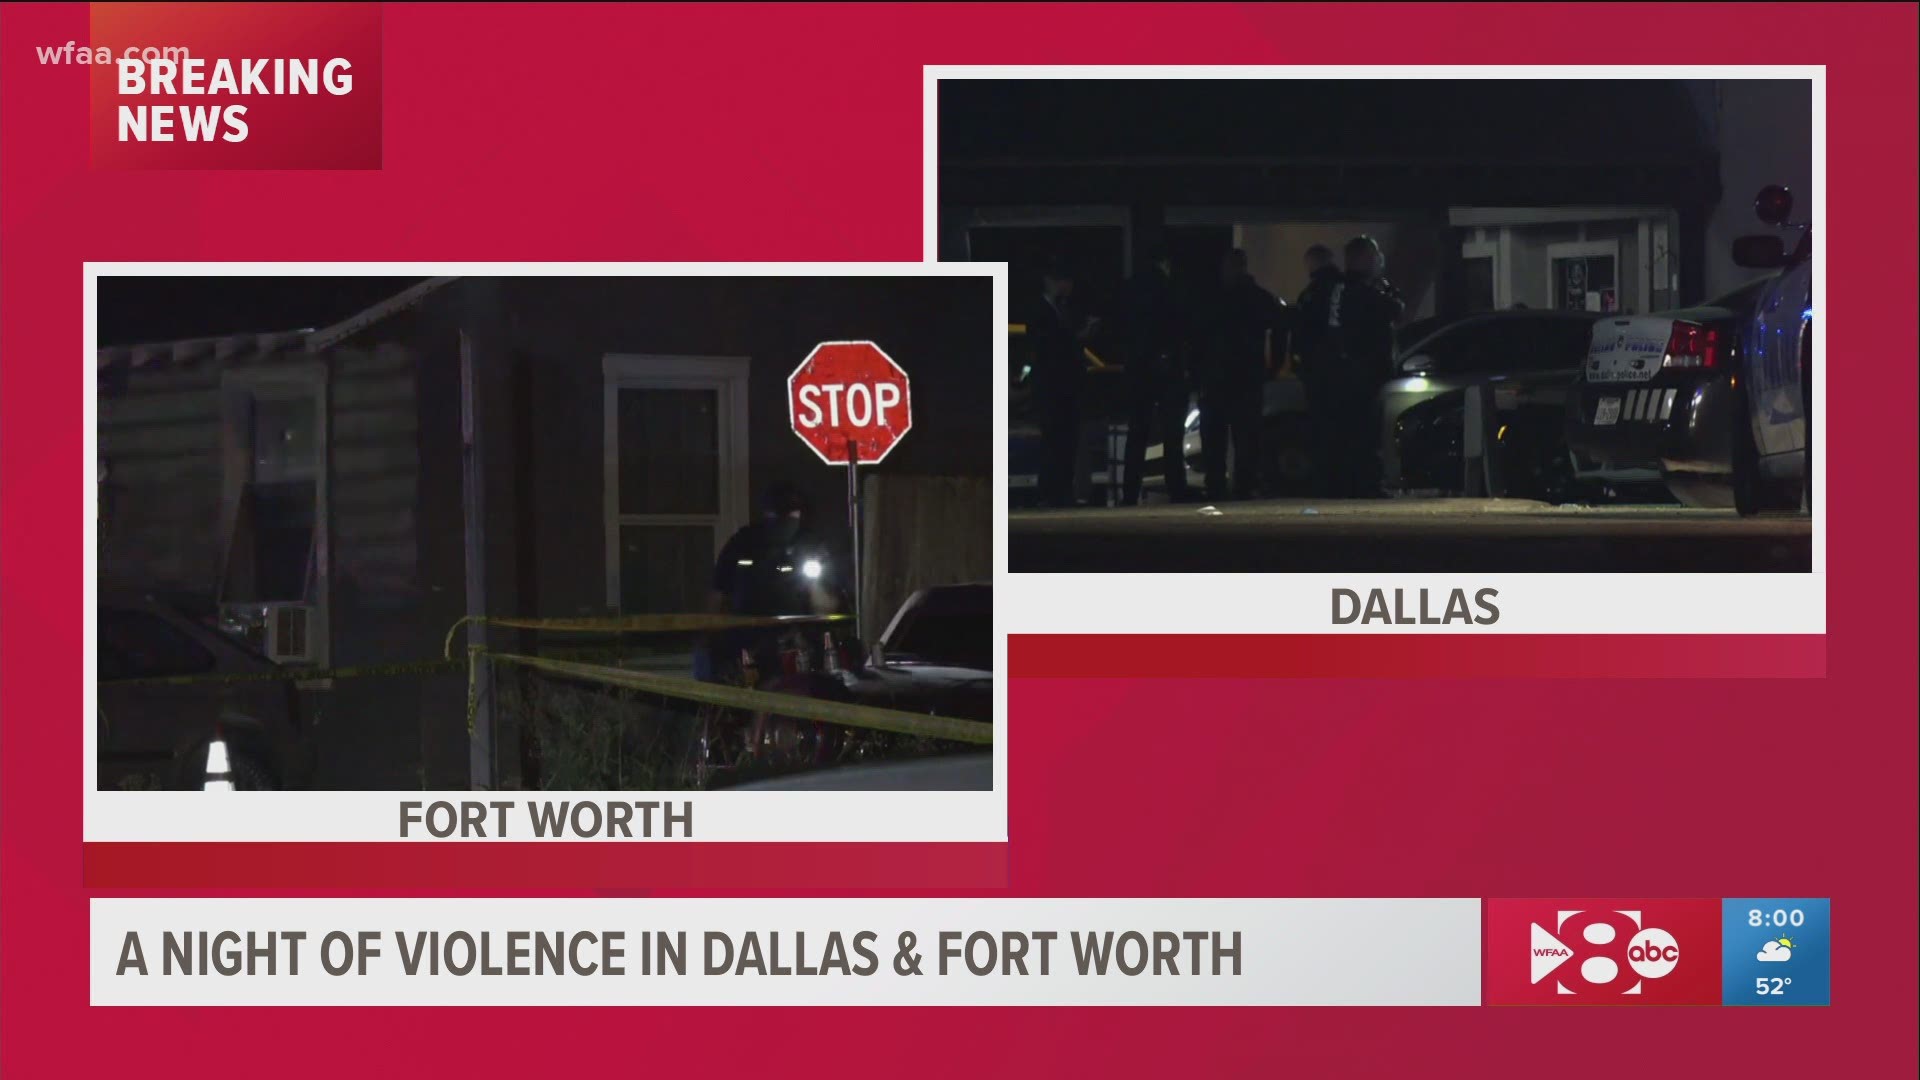 5 people were shot at a house party in Fort Worth and 3 people were shot at a club in Dallas.